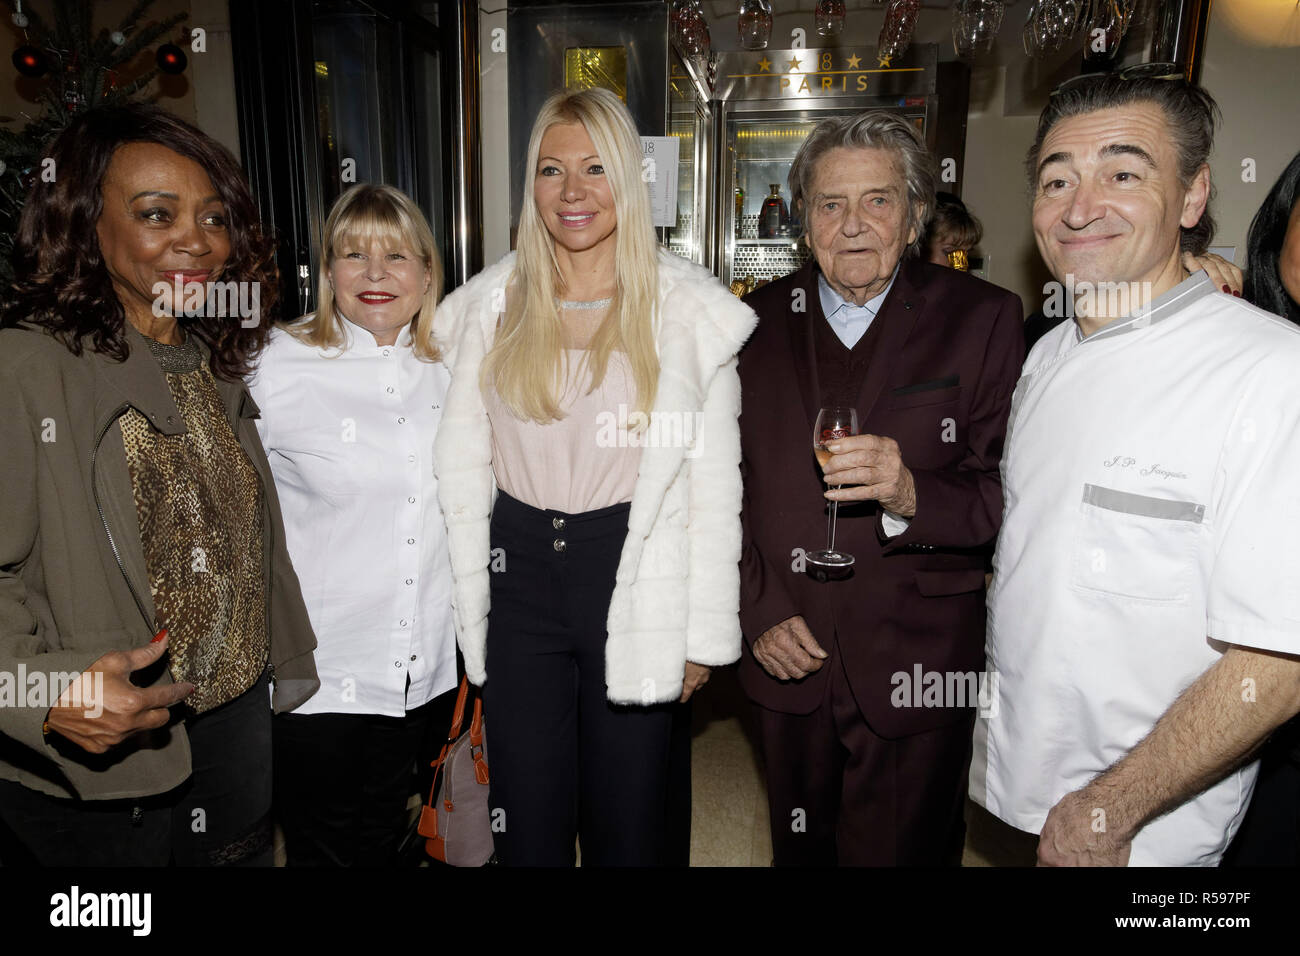 Paris, France. 29th Nov, 2018. Chef Ghislaine Arabian, Food Journalist  Nadine Rodd, Jean-Pierre Mocky and Chef Jean-Pierre Jacquin - Jean-Eric  Duluc, President of the International Federation of Tourism awarded the  2018 Lauriers